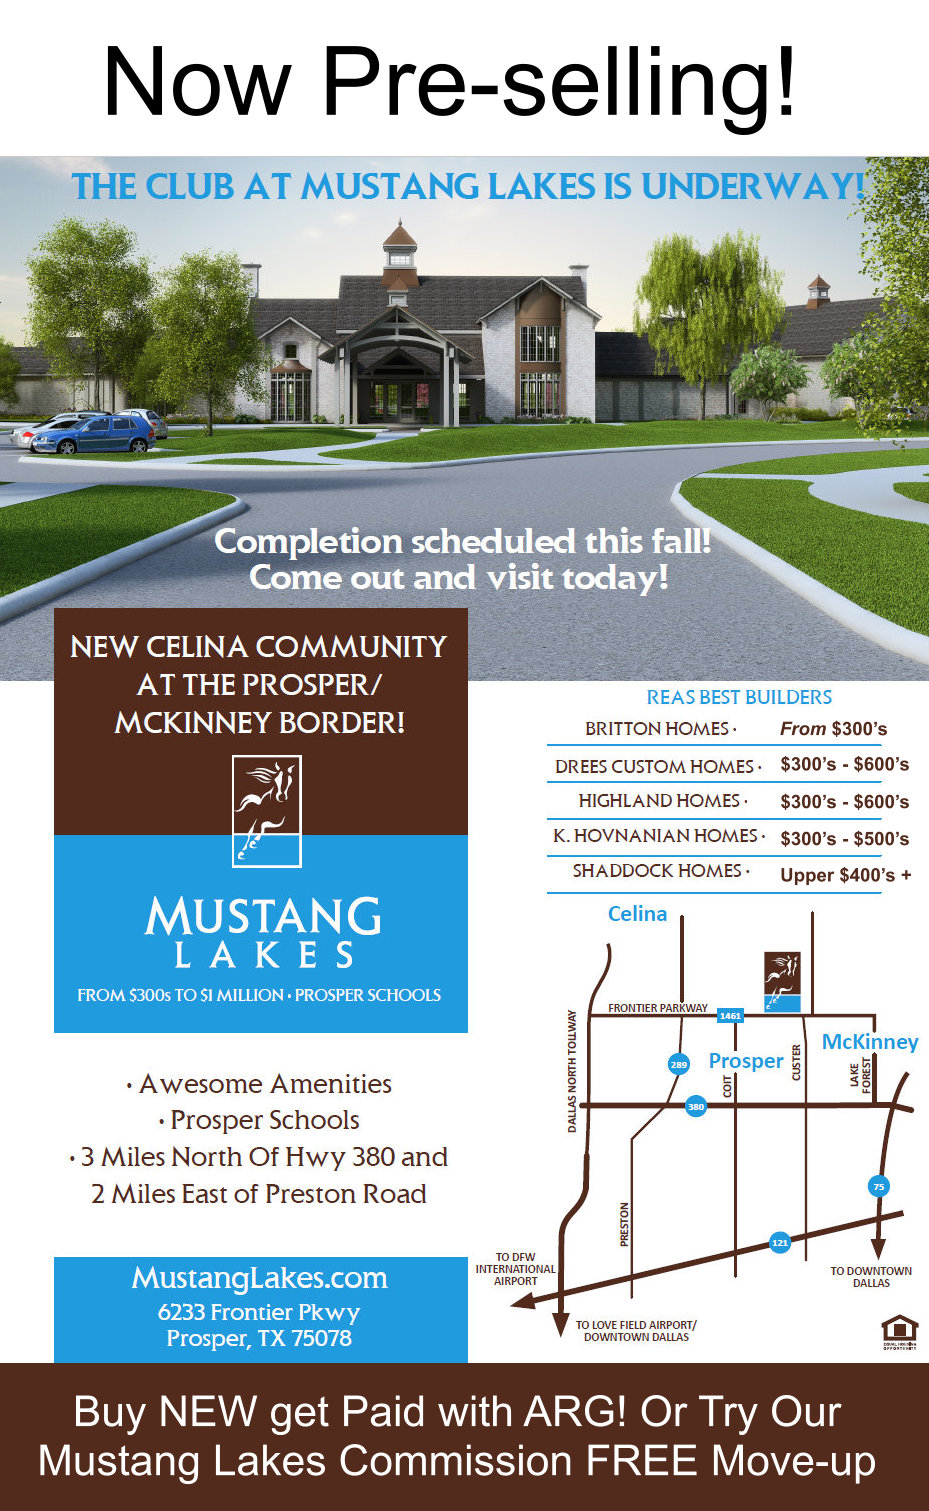 June Update - Mustang Lakes Celina - Now Selling and More!